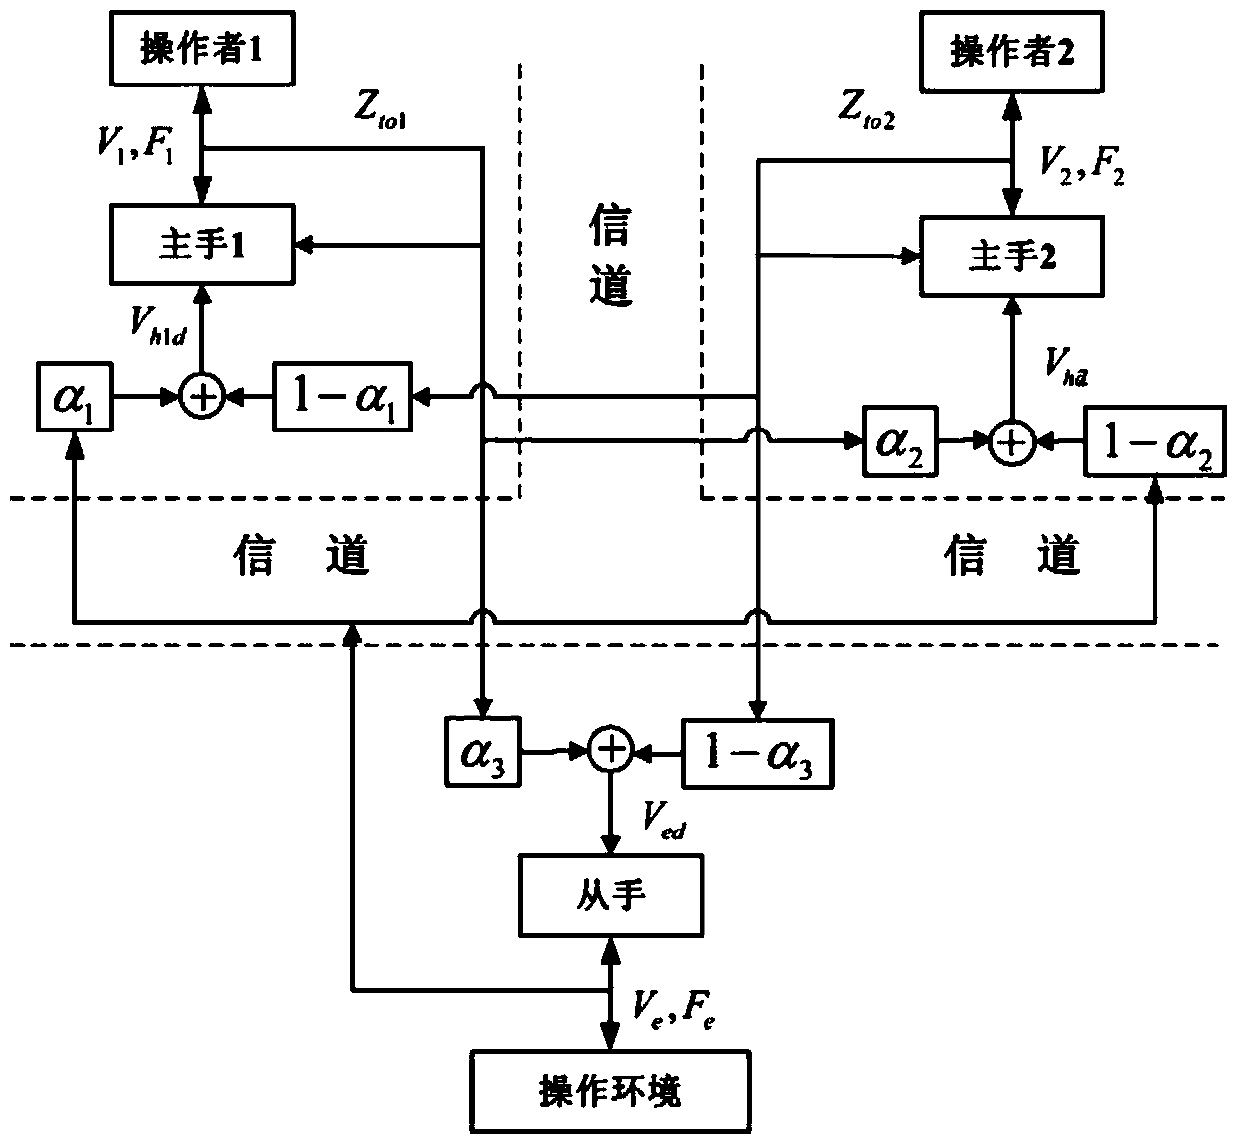 A Two-Person Shared Teleoperation Method with Multi-Advantage Factors